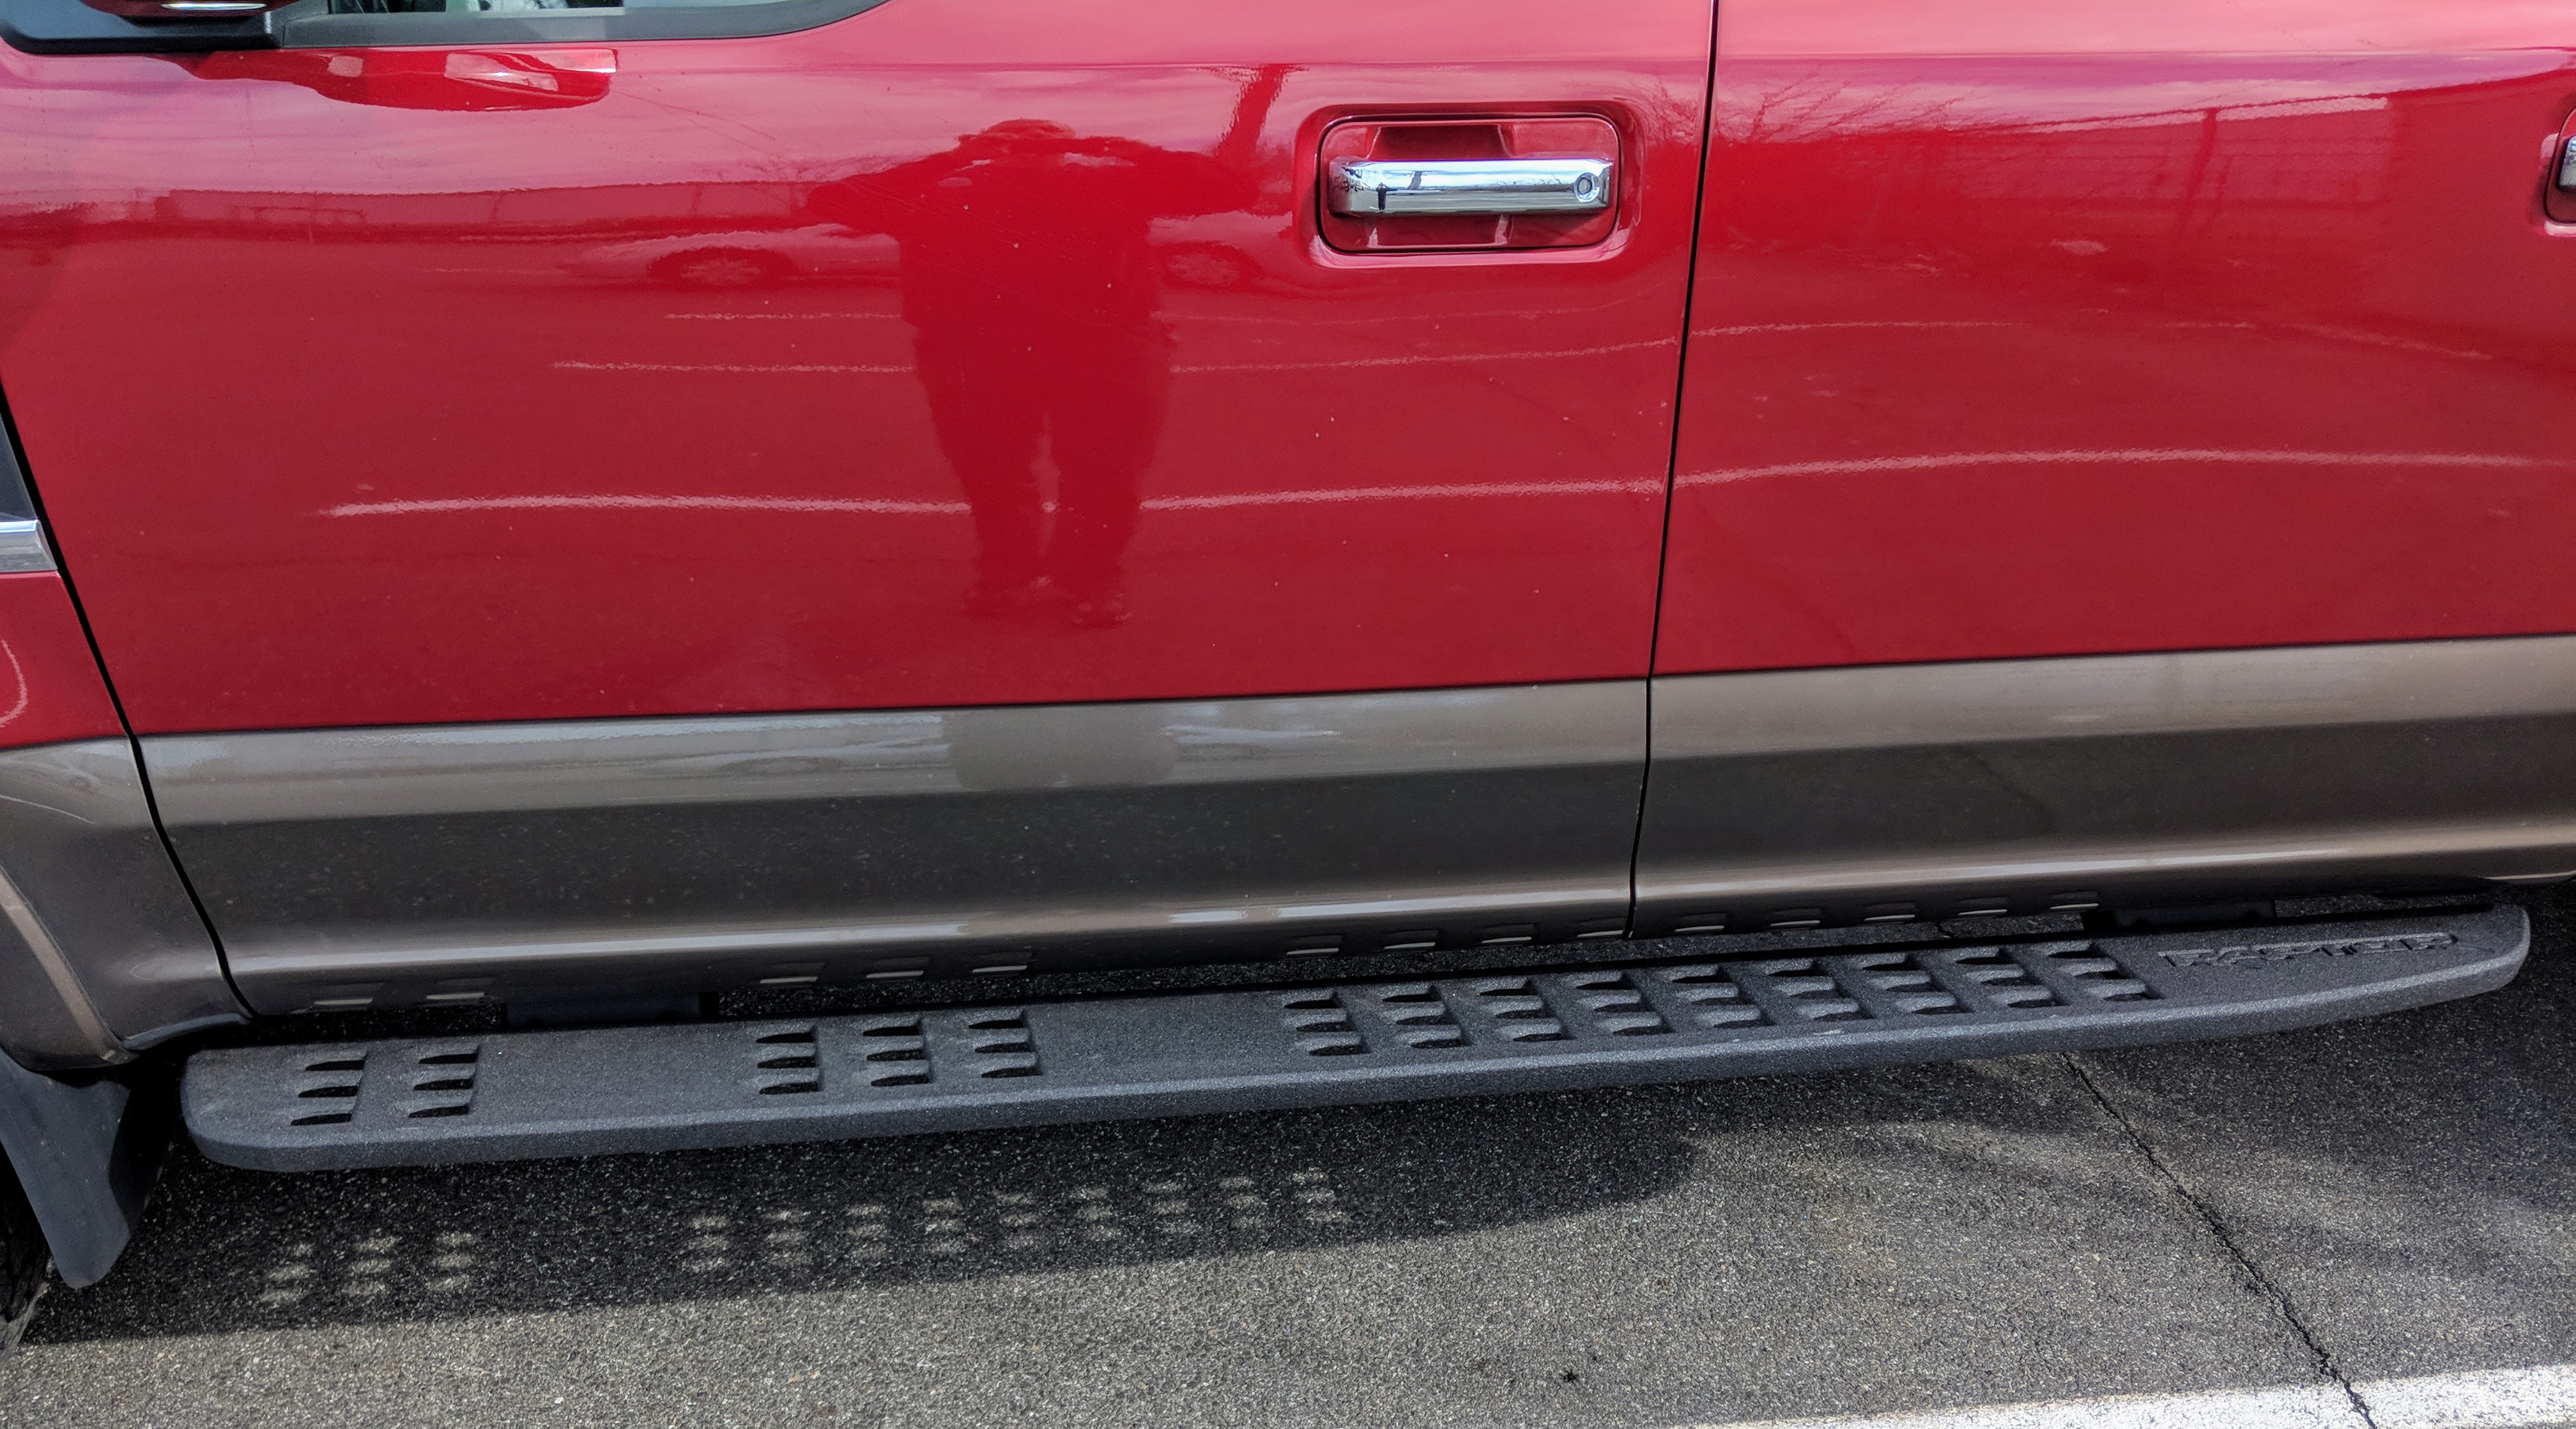 Ford Raptor step rails installed - Ford Truck Enthusiasts Forums